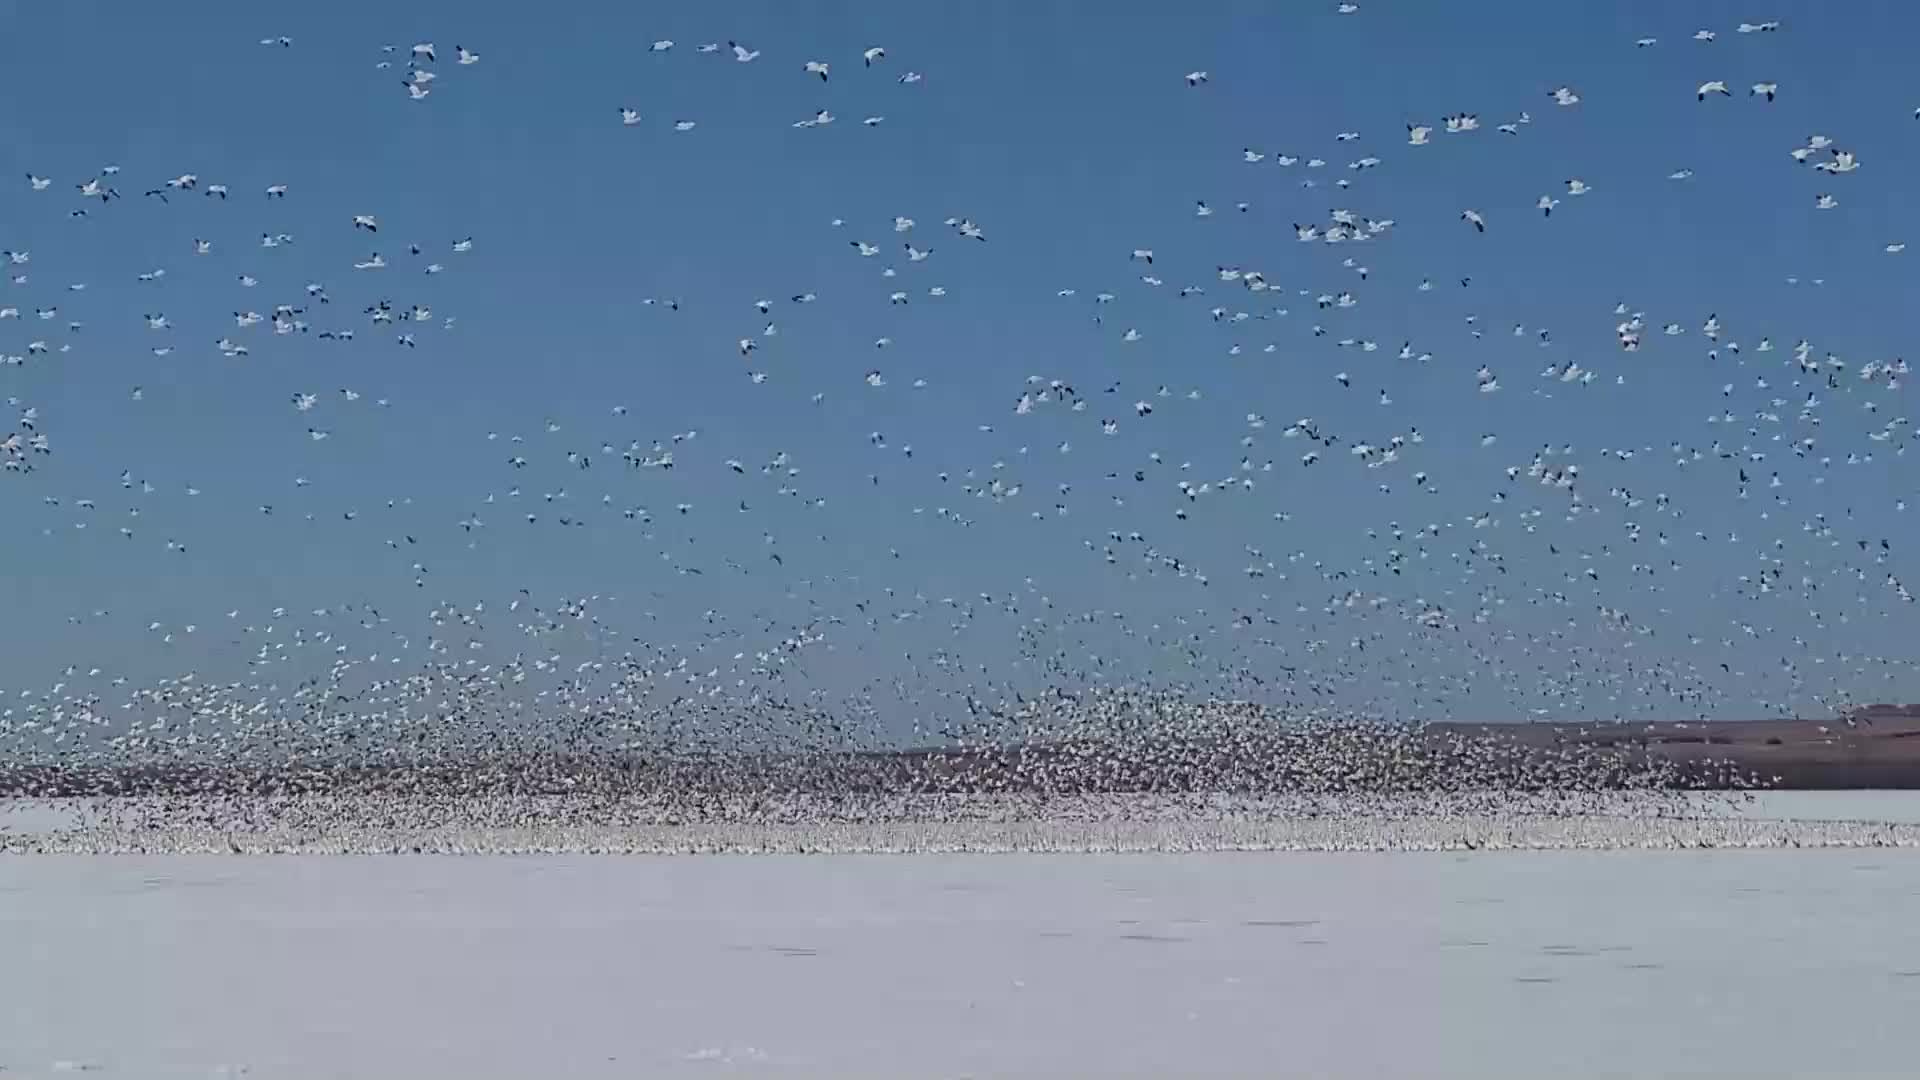 Blizzard of Snow Geese